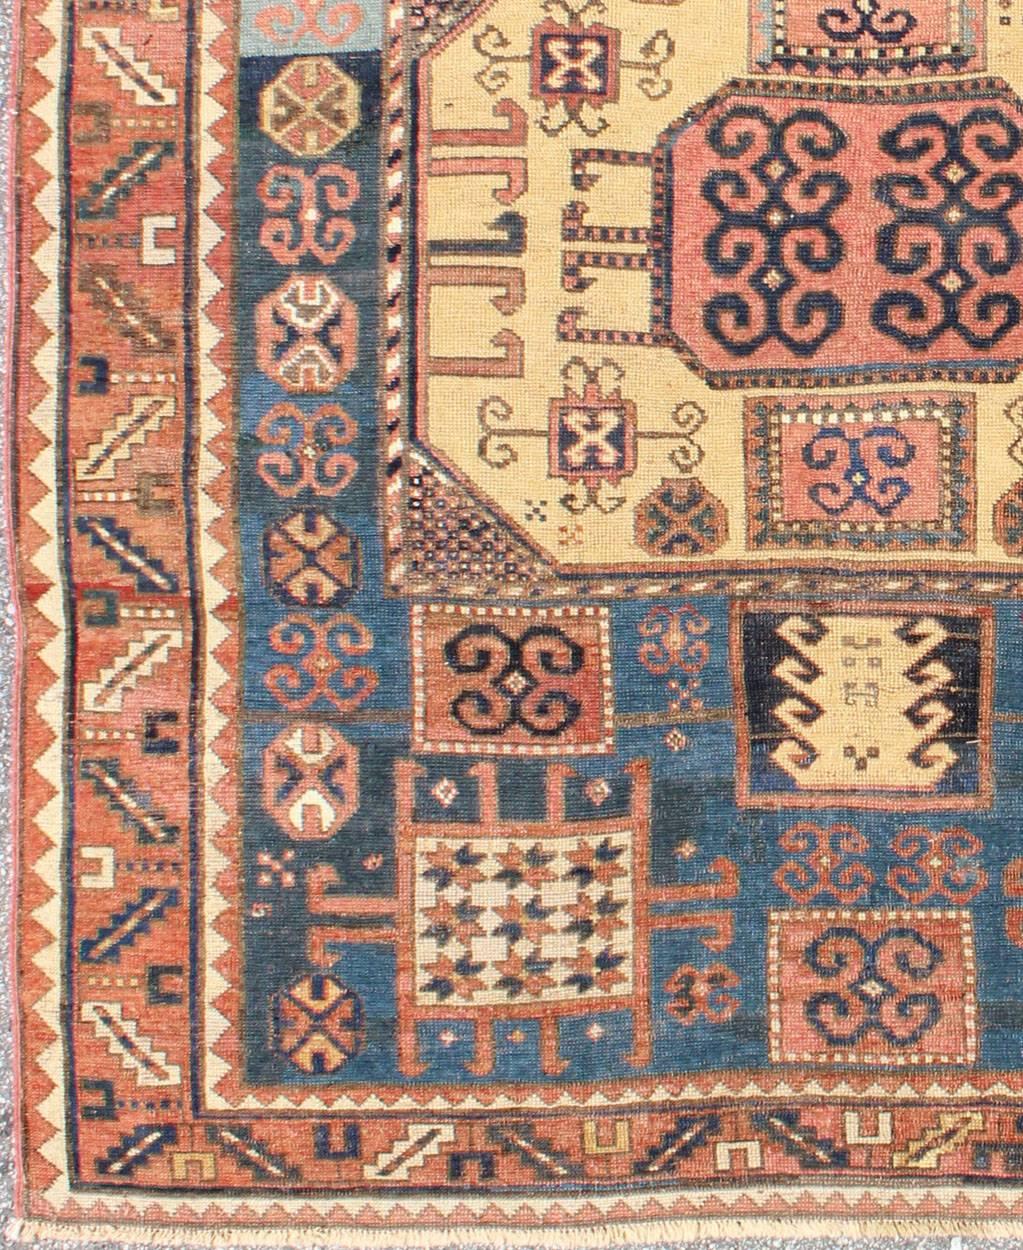 Antique Caucasian Karachopt Rug large rug in Teal and soft Yellow, 16-0601,  Keivan Woven Arts, antique Kazak Karachopf rugs are among the most desirable Caucasian rugs. The colors of rusty, salmon, pink, buttery yellow, various blue and ivories